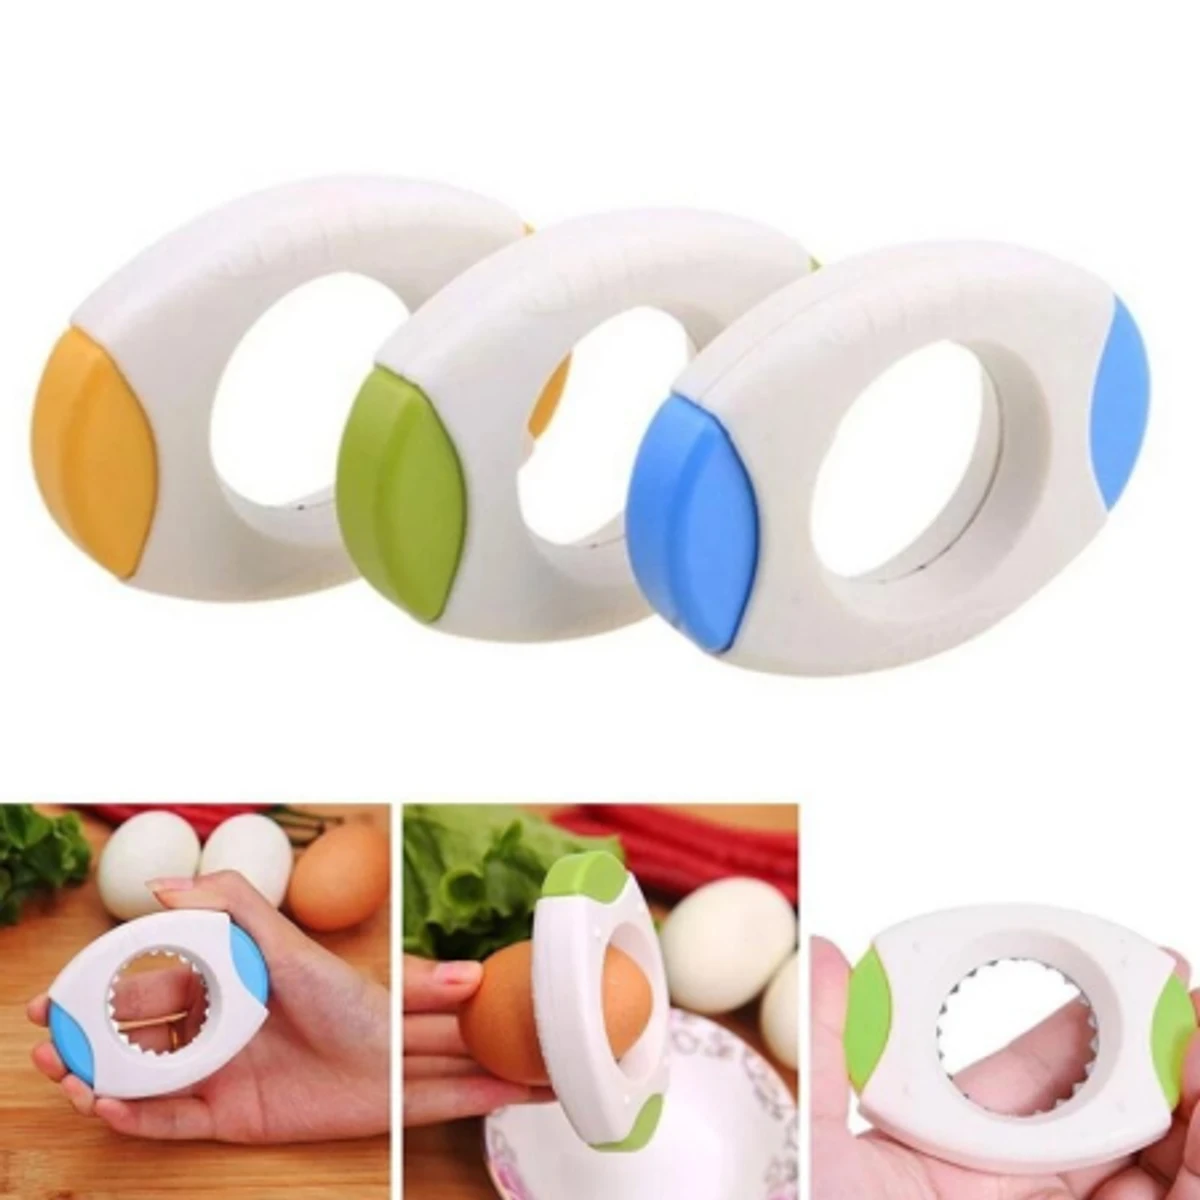 New Cute Egg Shell Opener Separator Kitchen Gadgets Tools Knocker Raw Cracker Boiled Topper Essential